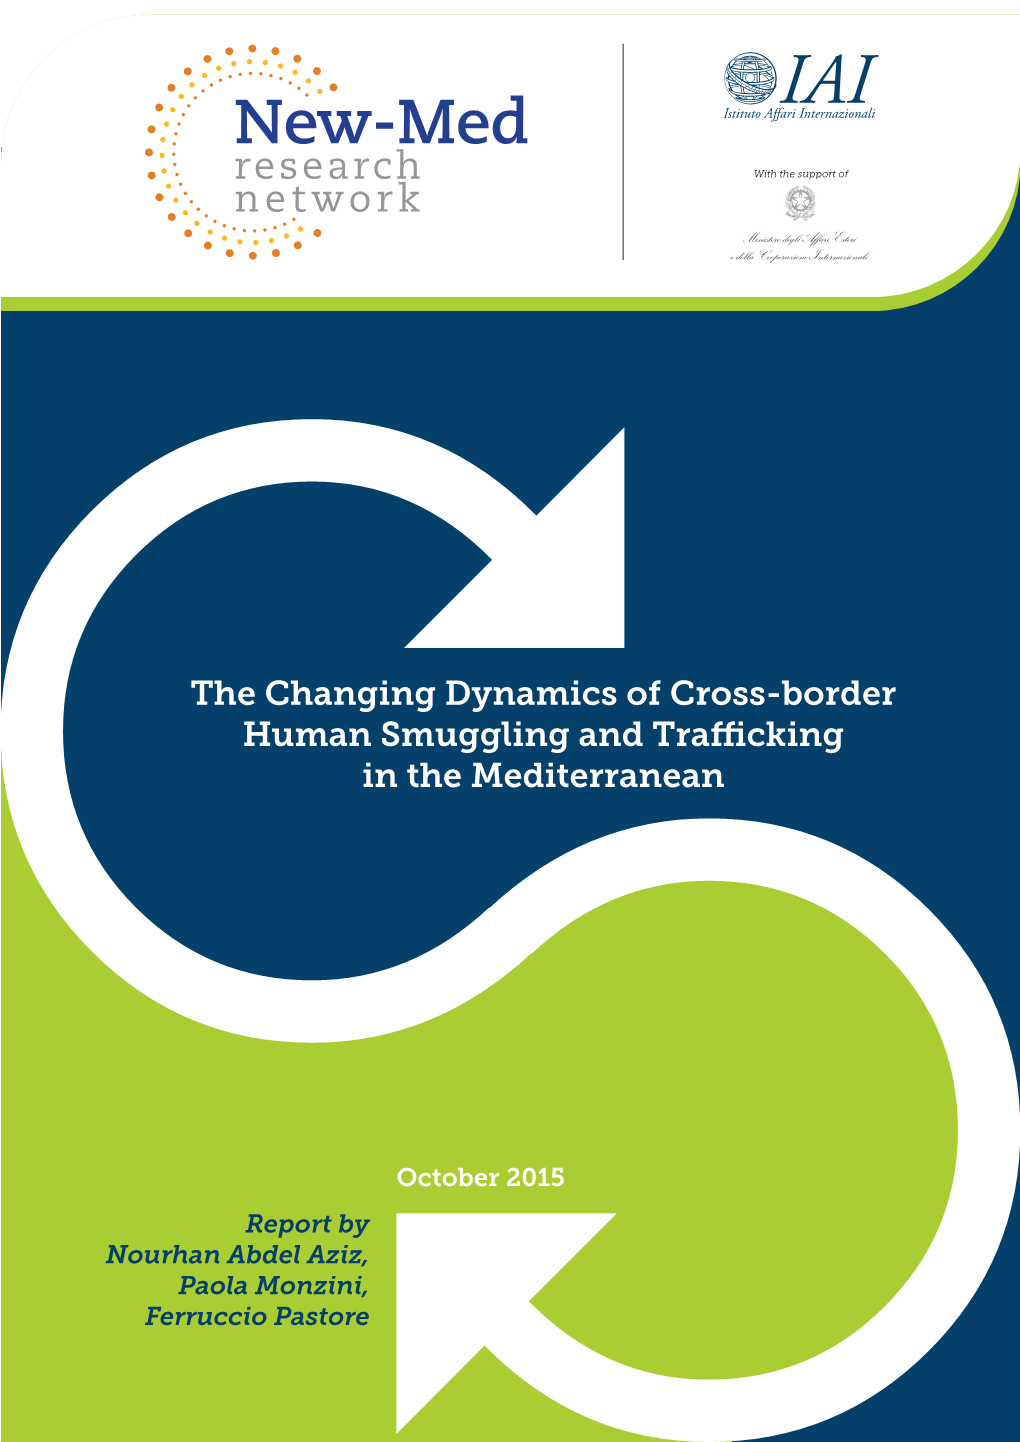 The Changing Dynamics of Cross-Border Human Smuggling and Trafficking in the Mediterranean